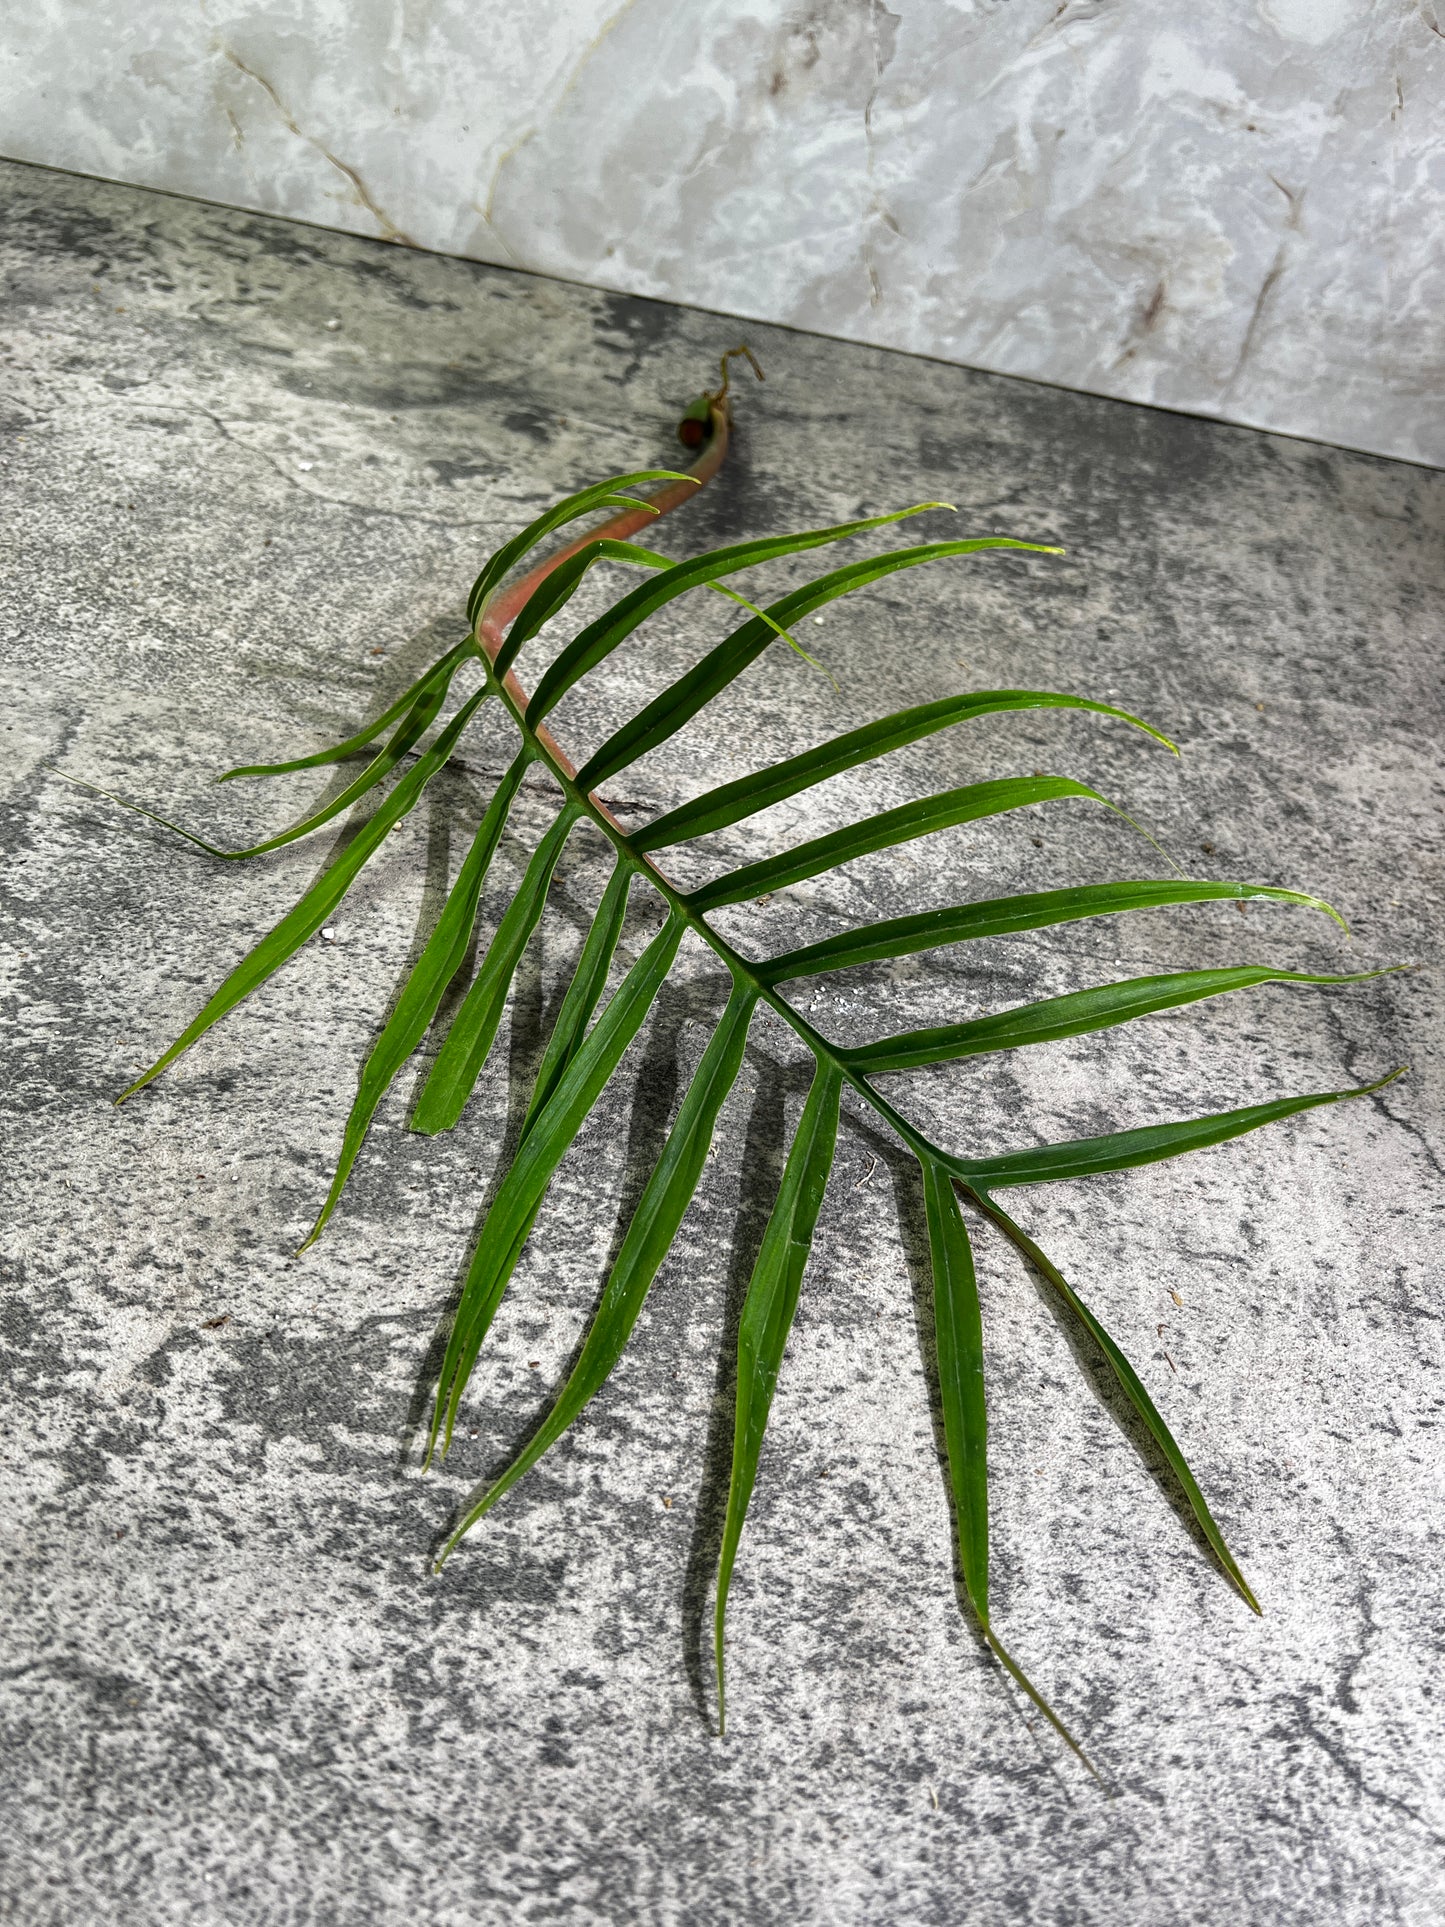 Philodendron Tortum rooting cutting 1 leaf 12” long